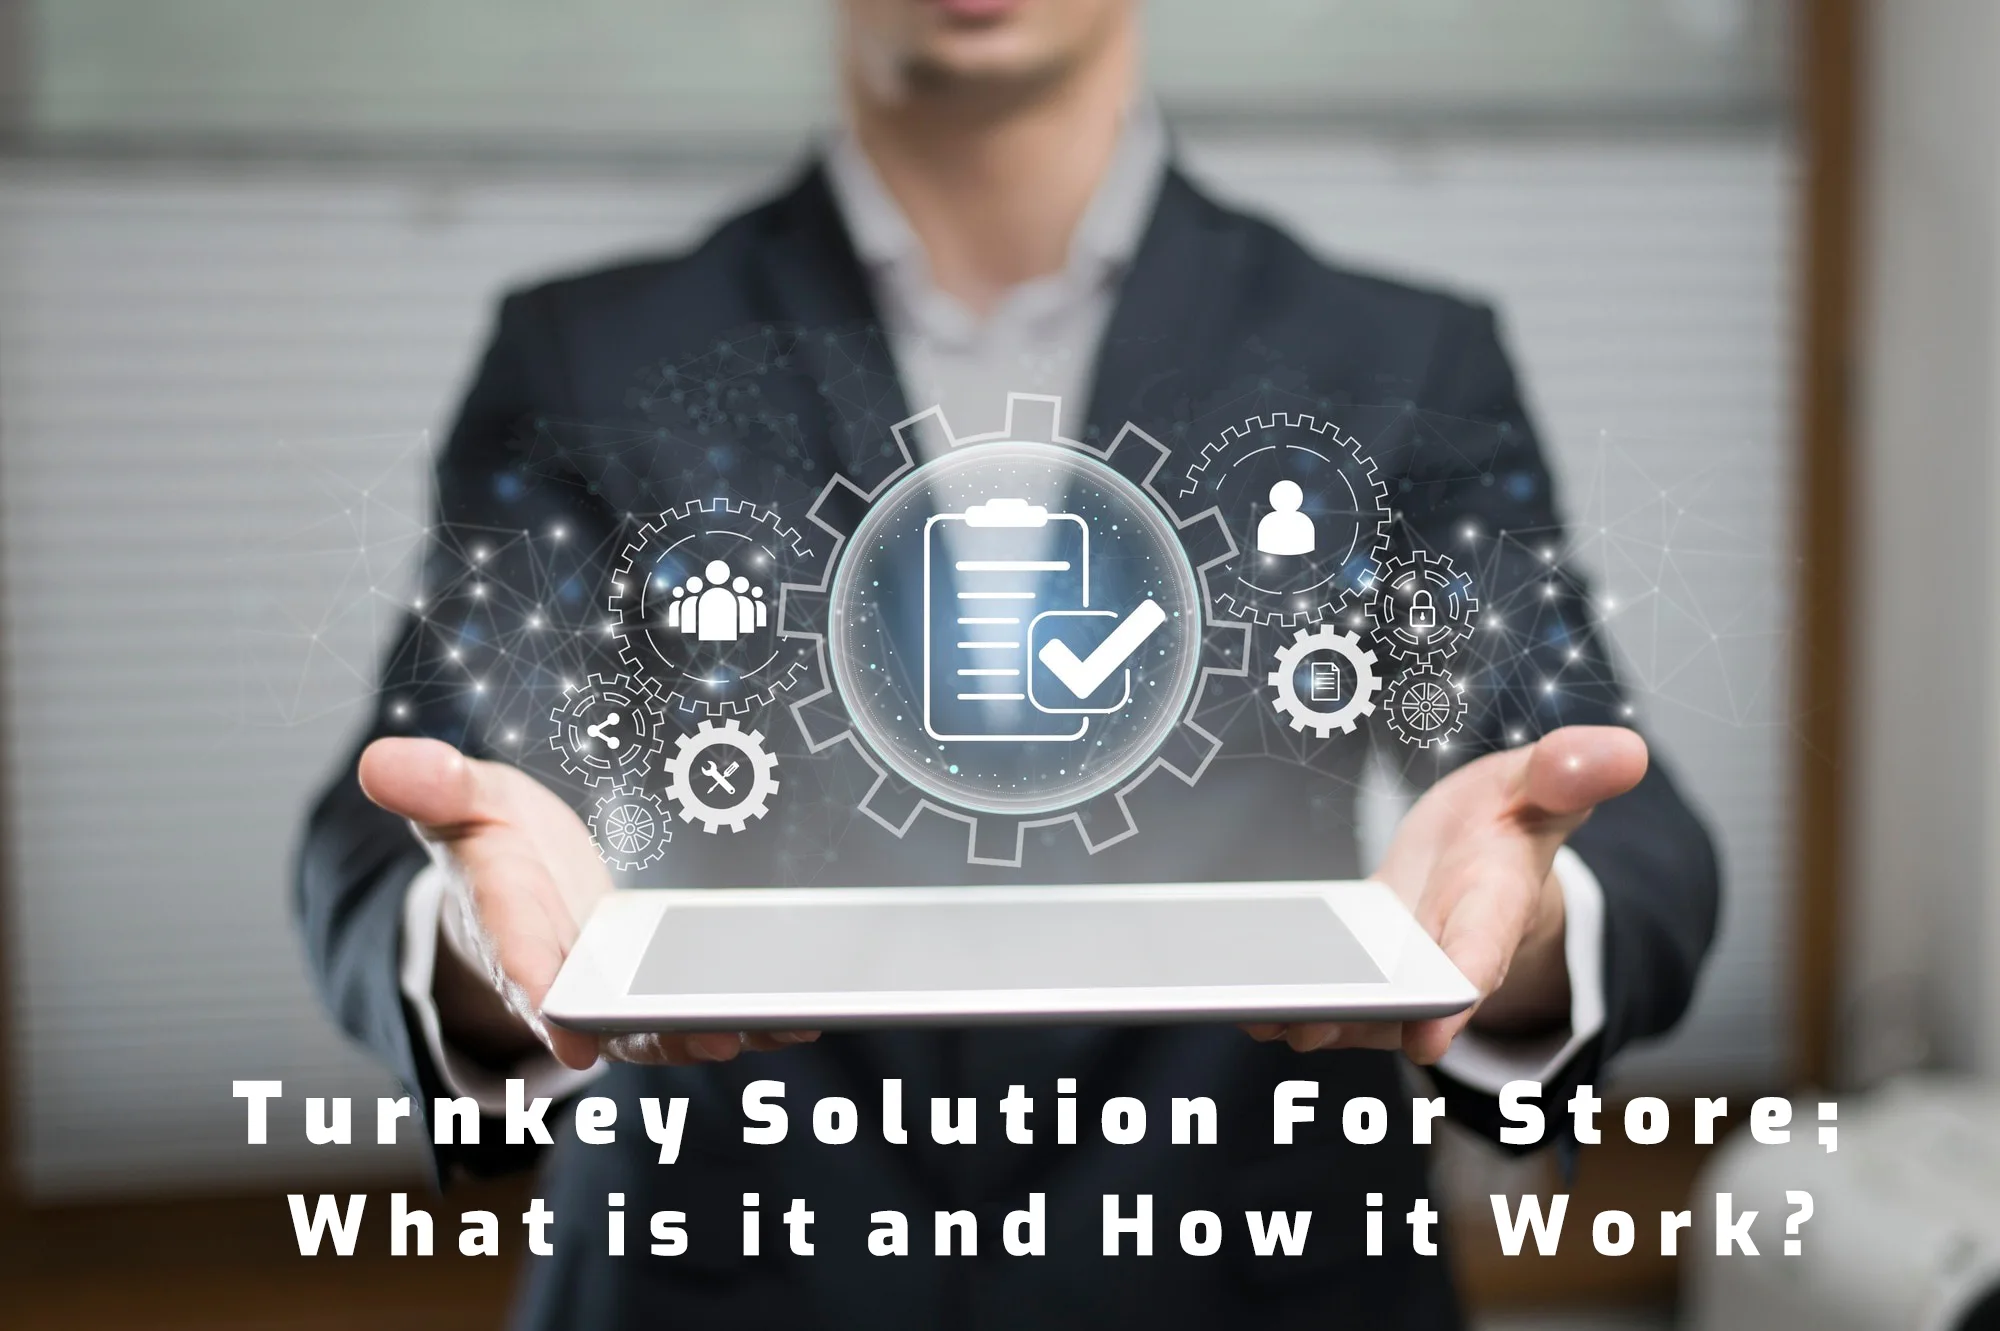 Turnkey Solution For Store: What is it and How it Work?